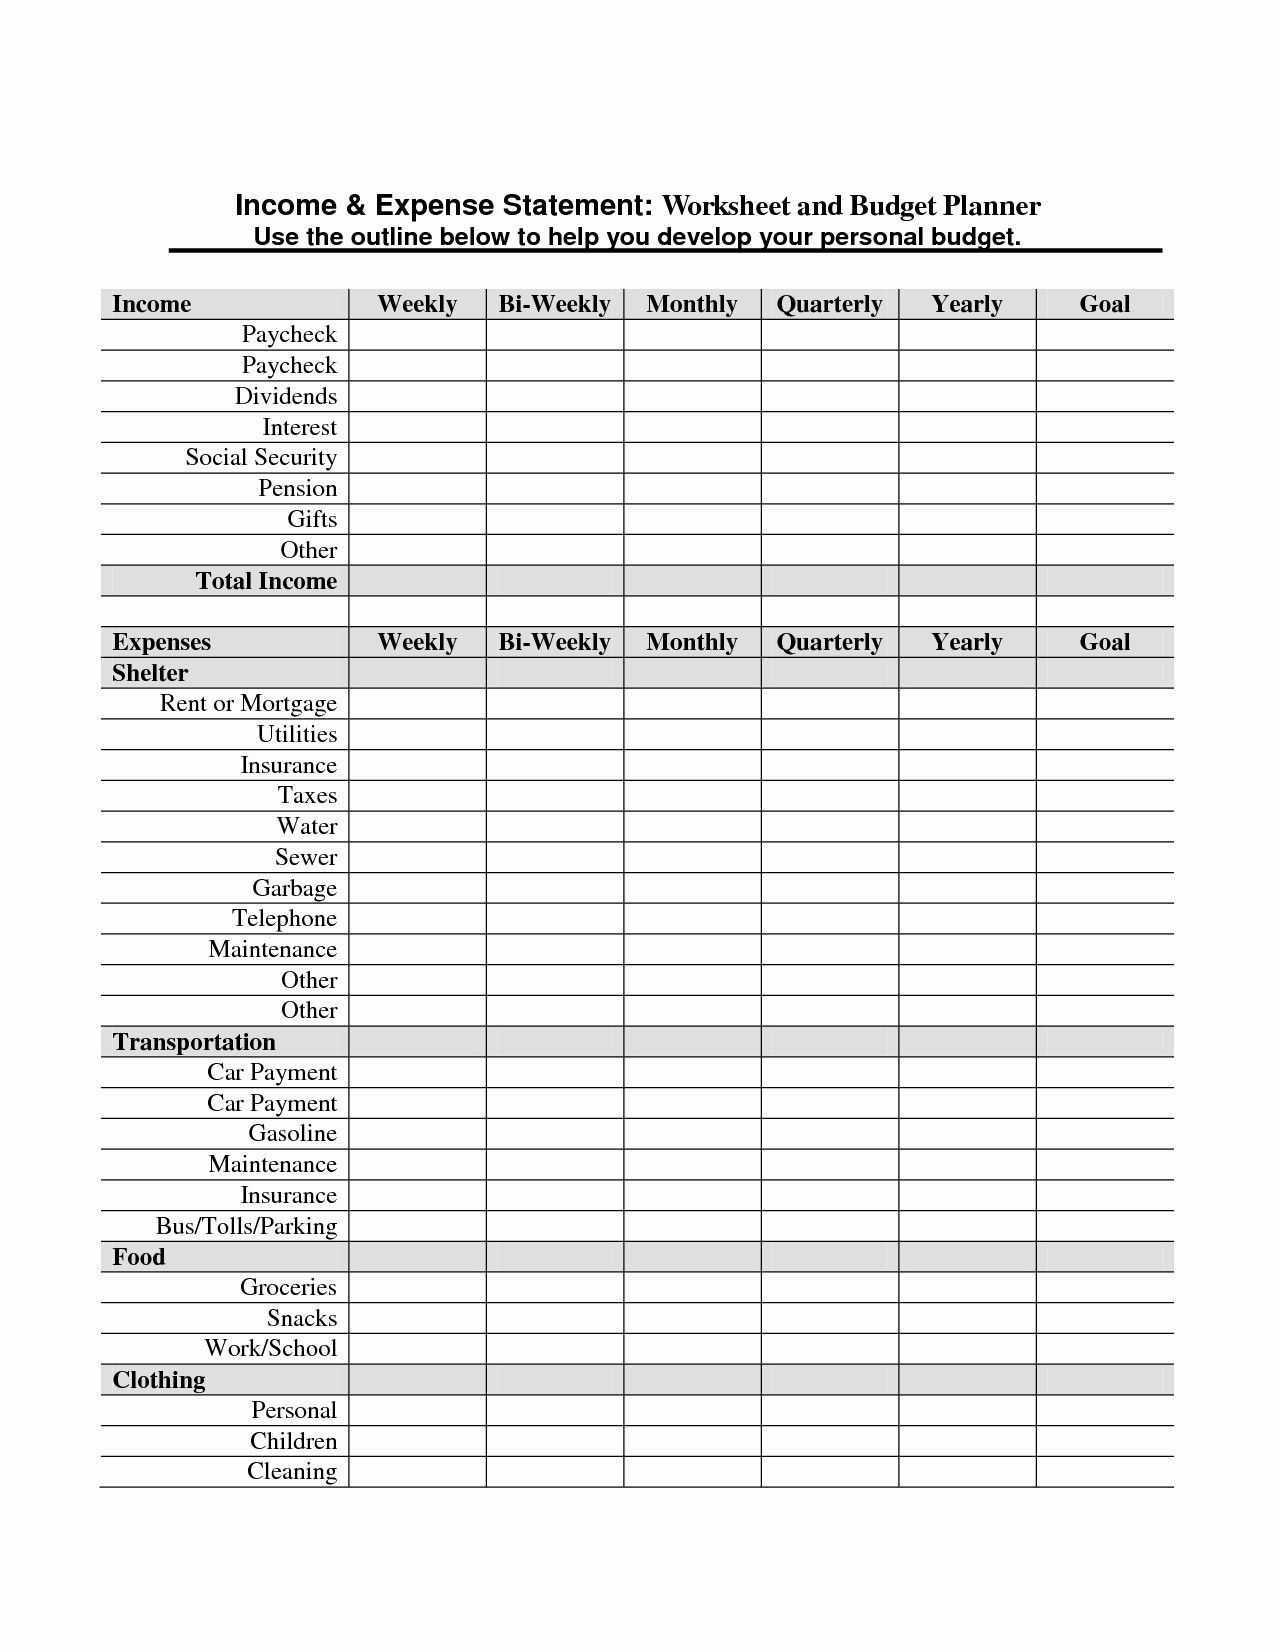 Basic Income Statement Template Excel Eadsheet New Sign Up Regarding Blank Personal Financial Statement Template